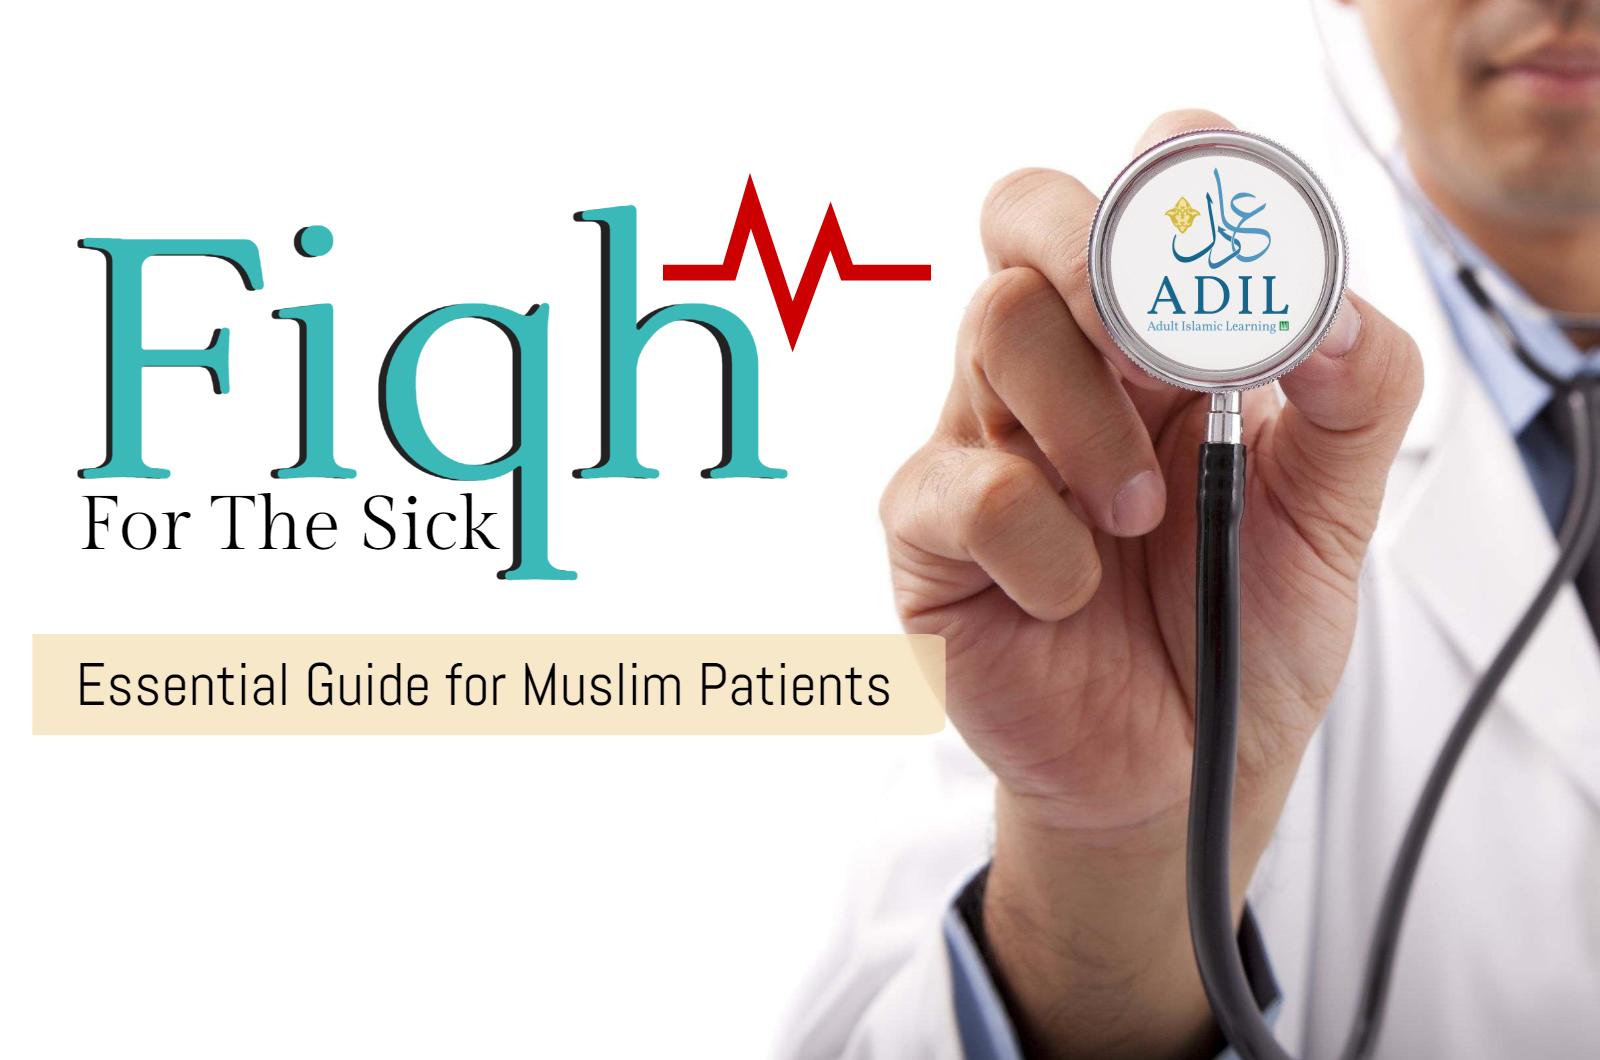 Fiqh for the sick